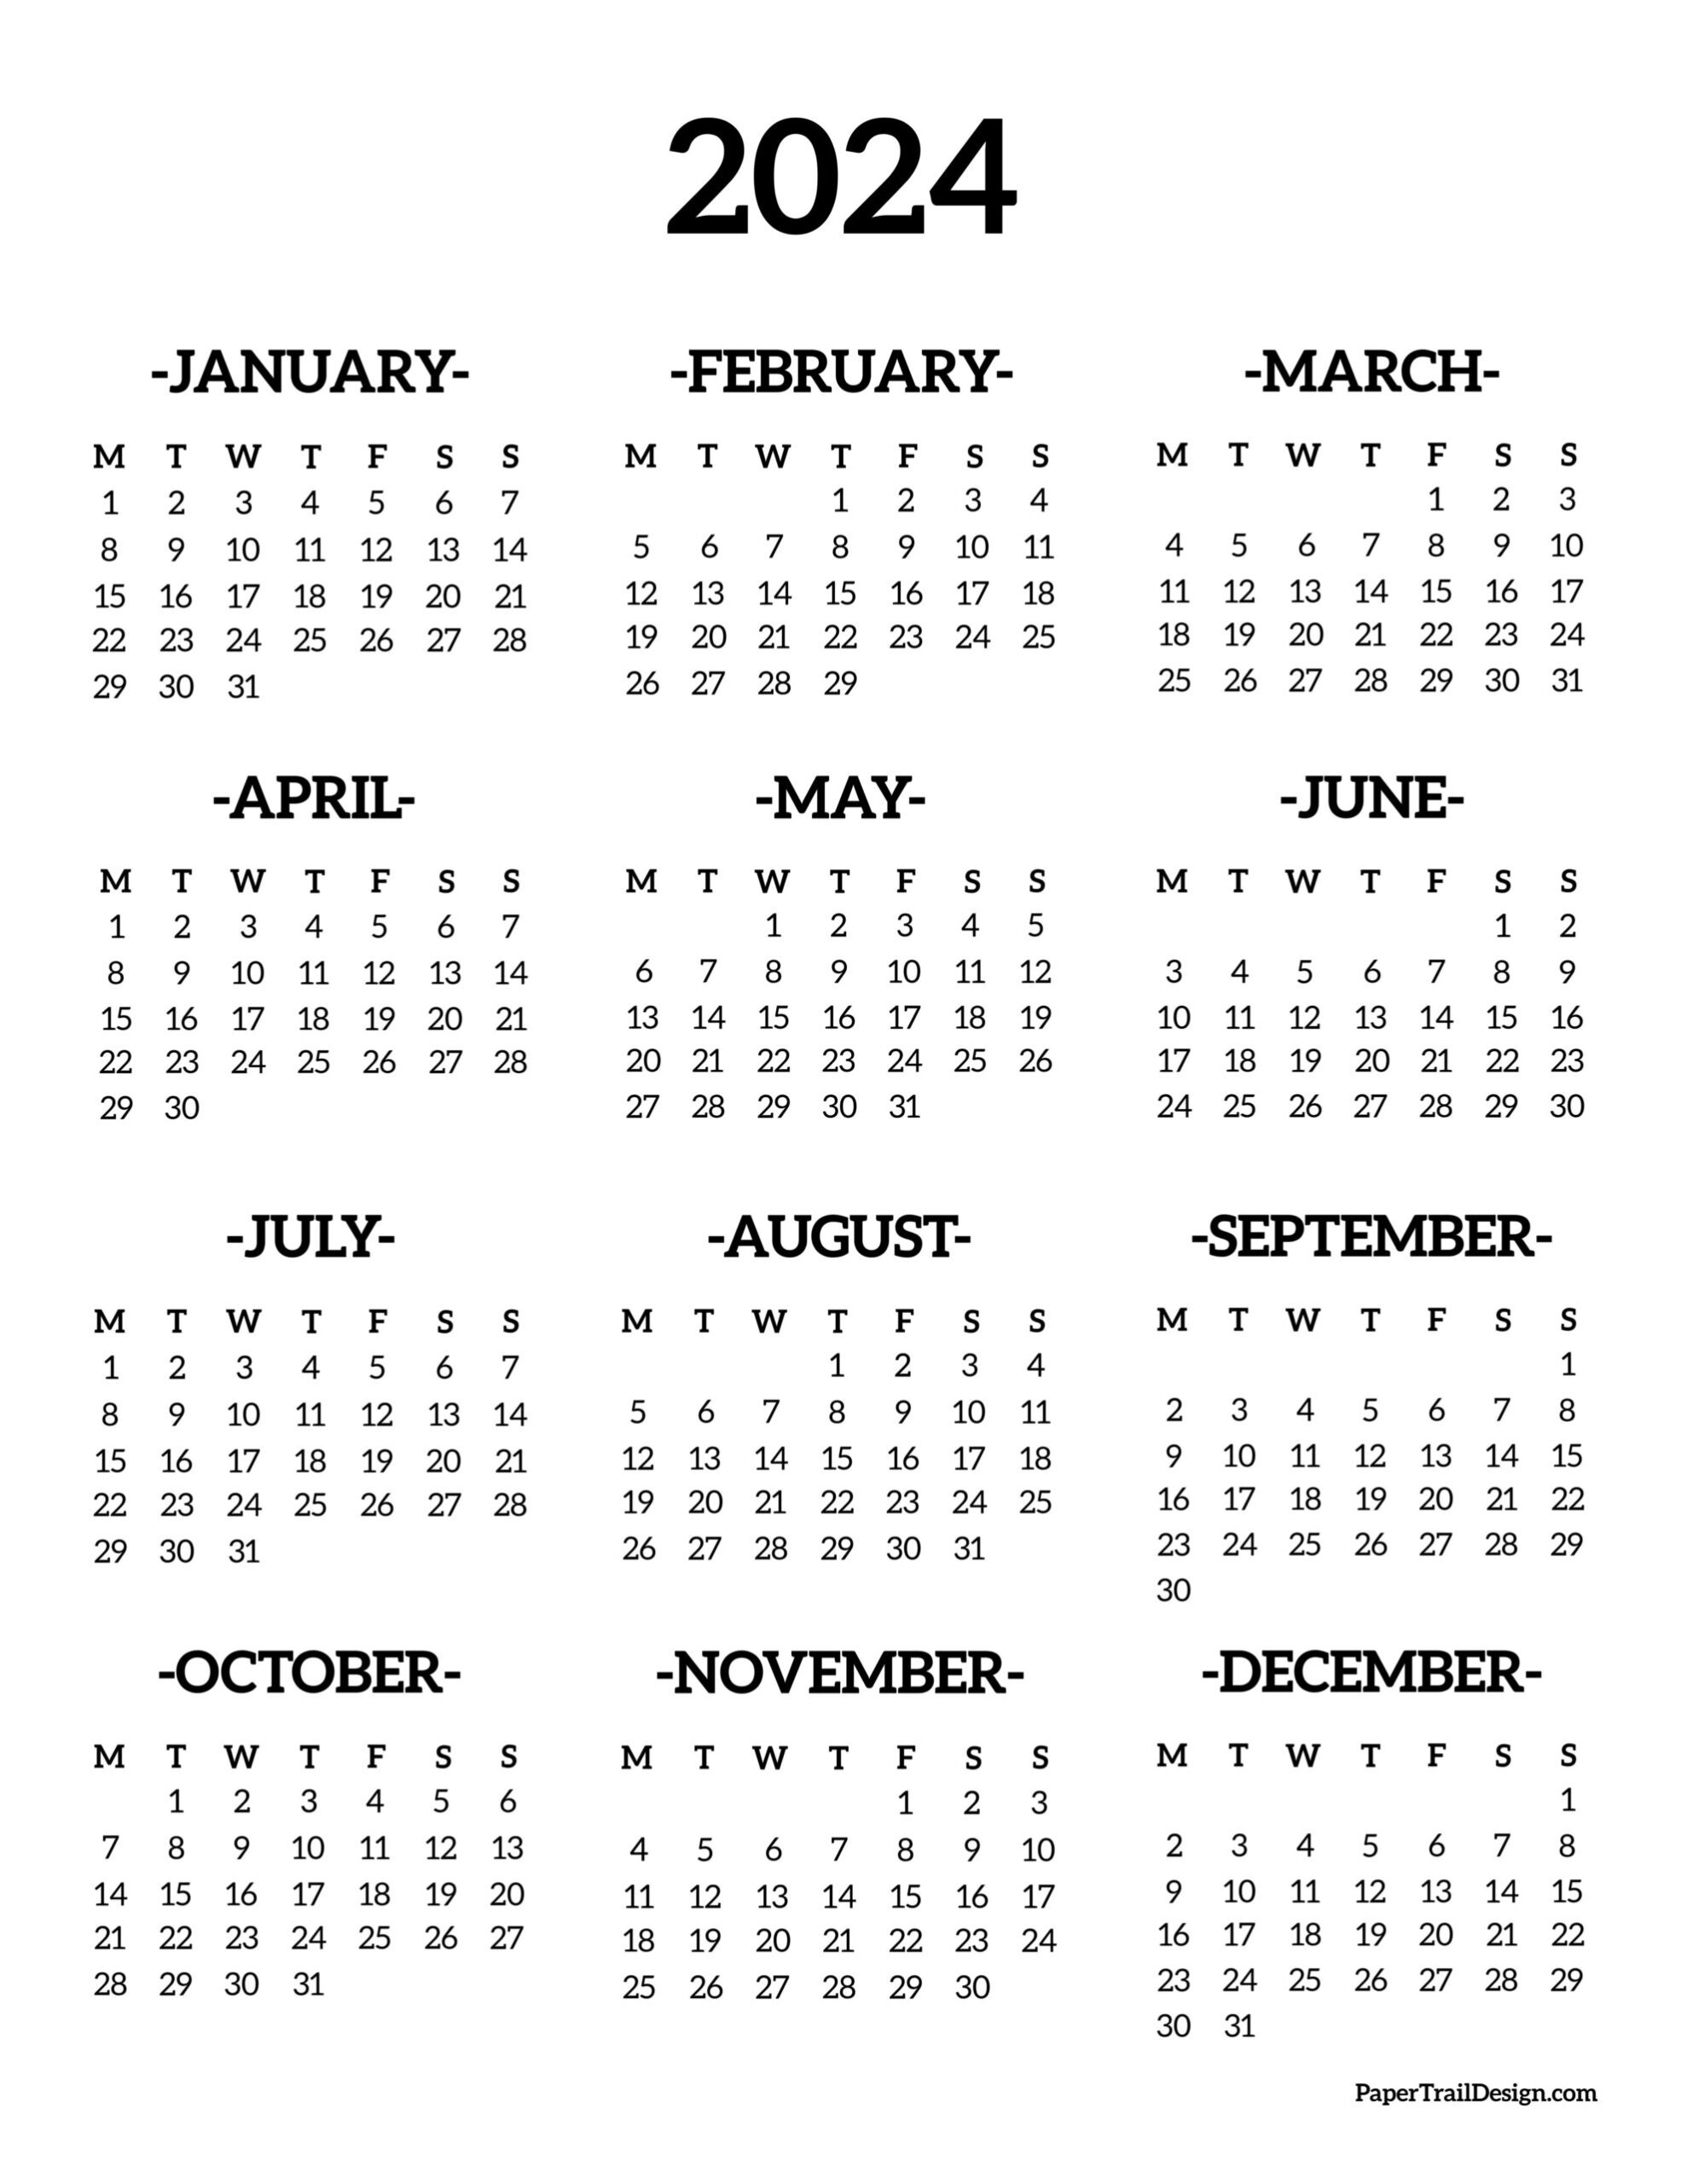 2024 Monday Start Calendar - One Page - Paper Trail Design with regard to Free Printable Calendar 2024 Starting Monday